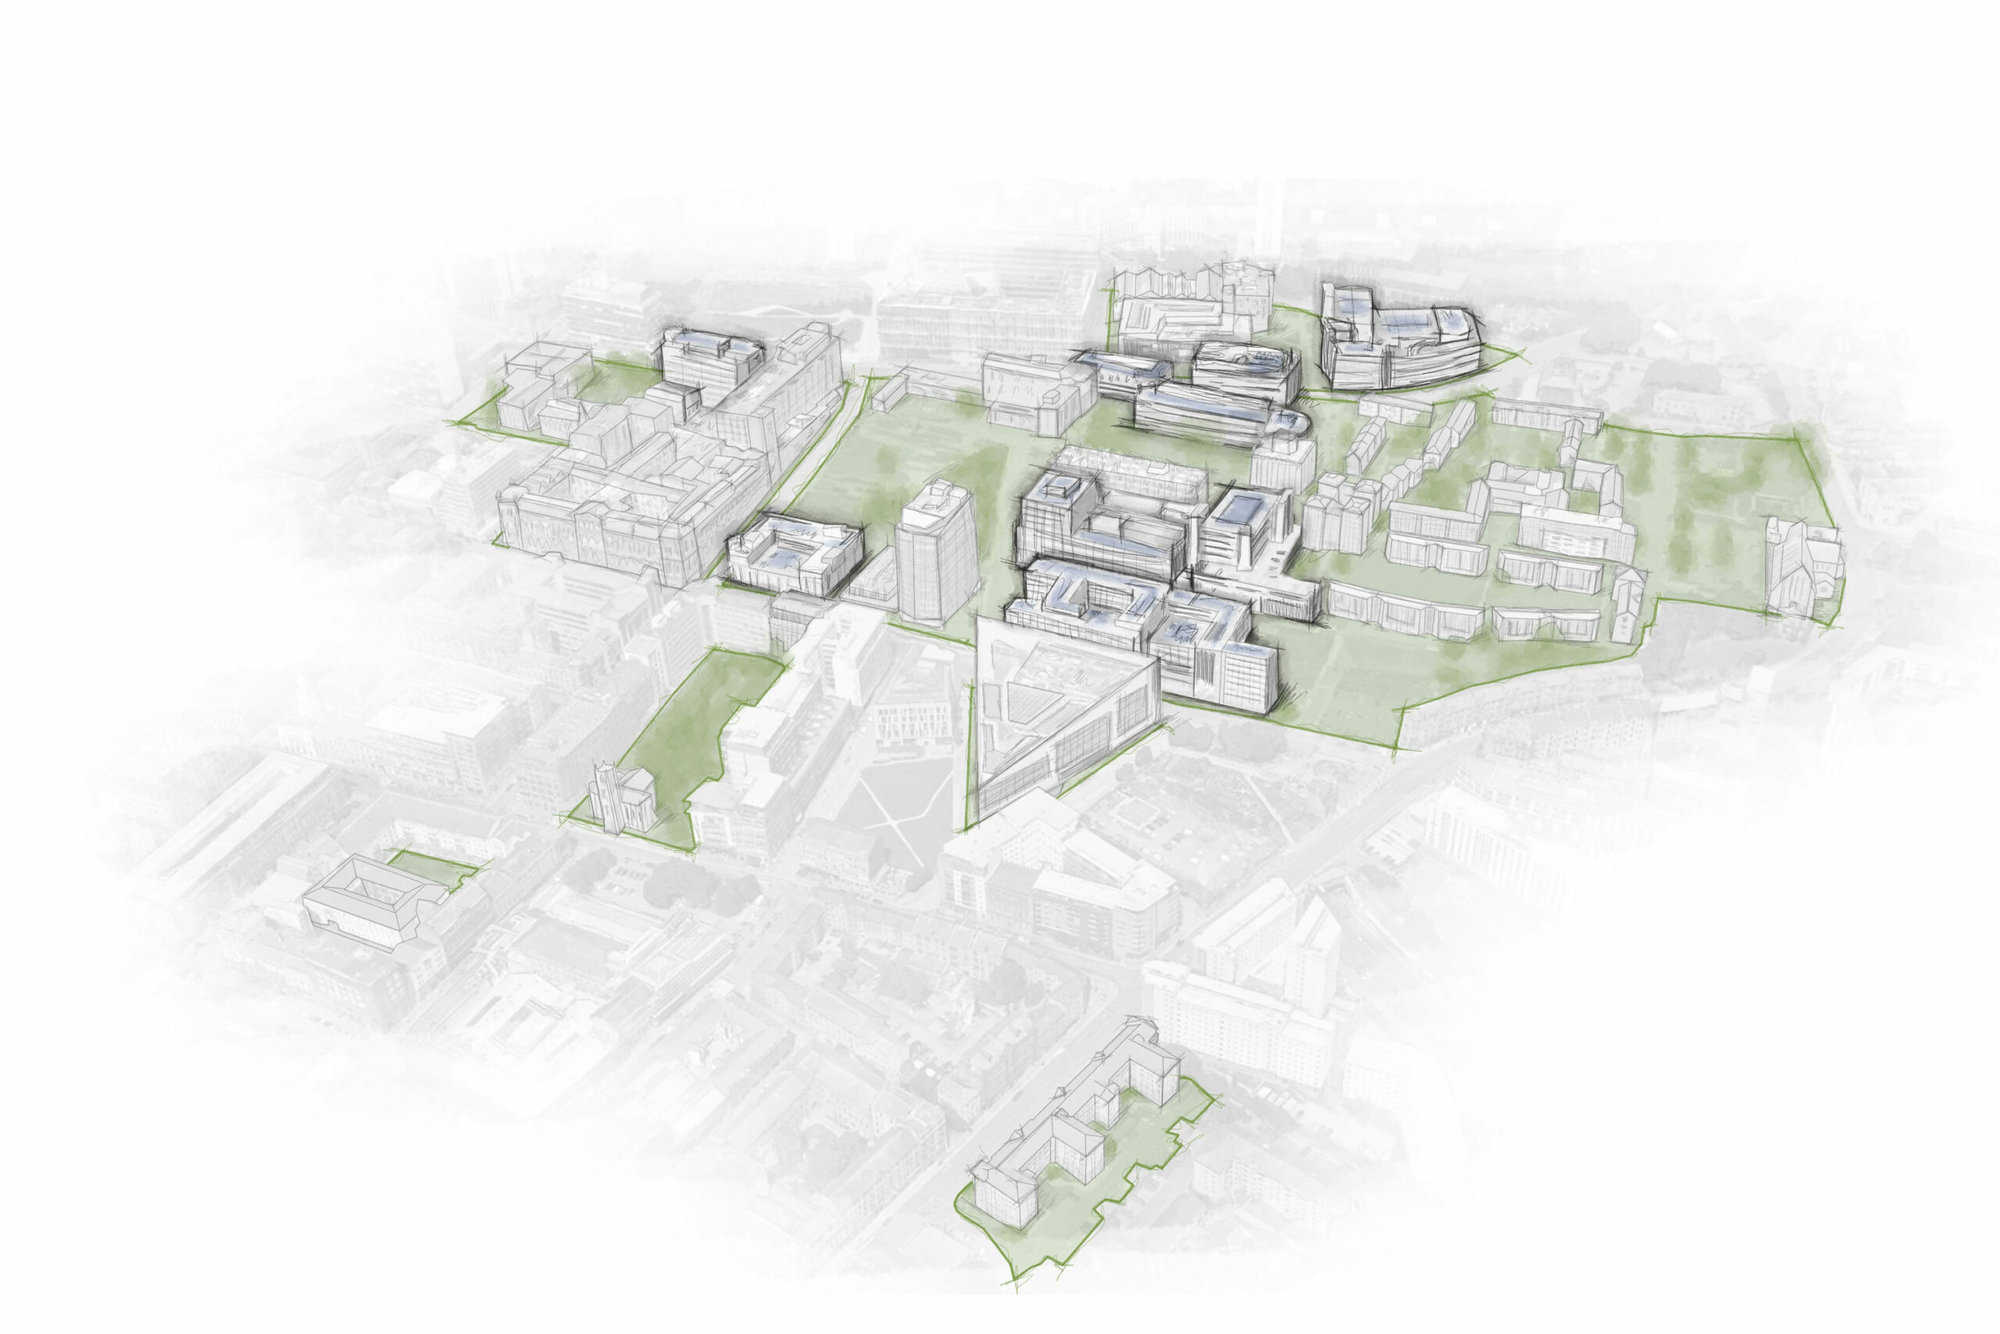 University of Strathclyde - campus image key - carbon neutral, climate ready estate